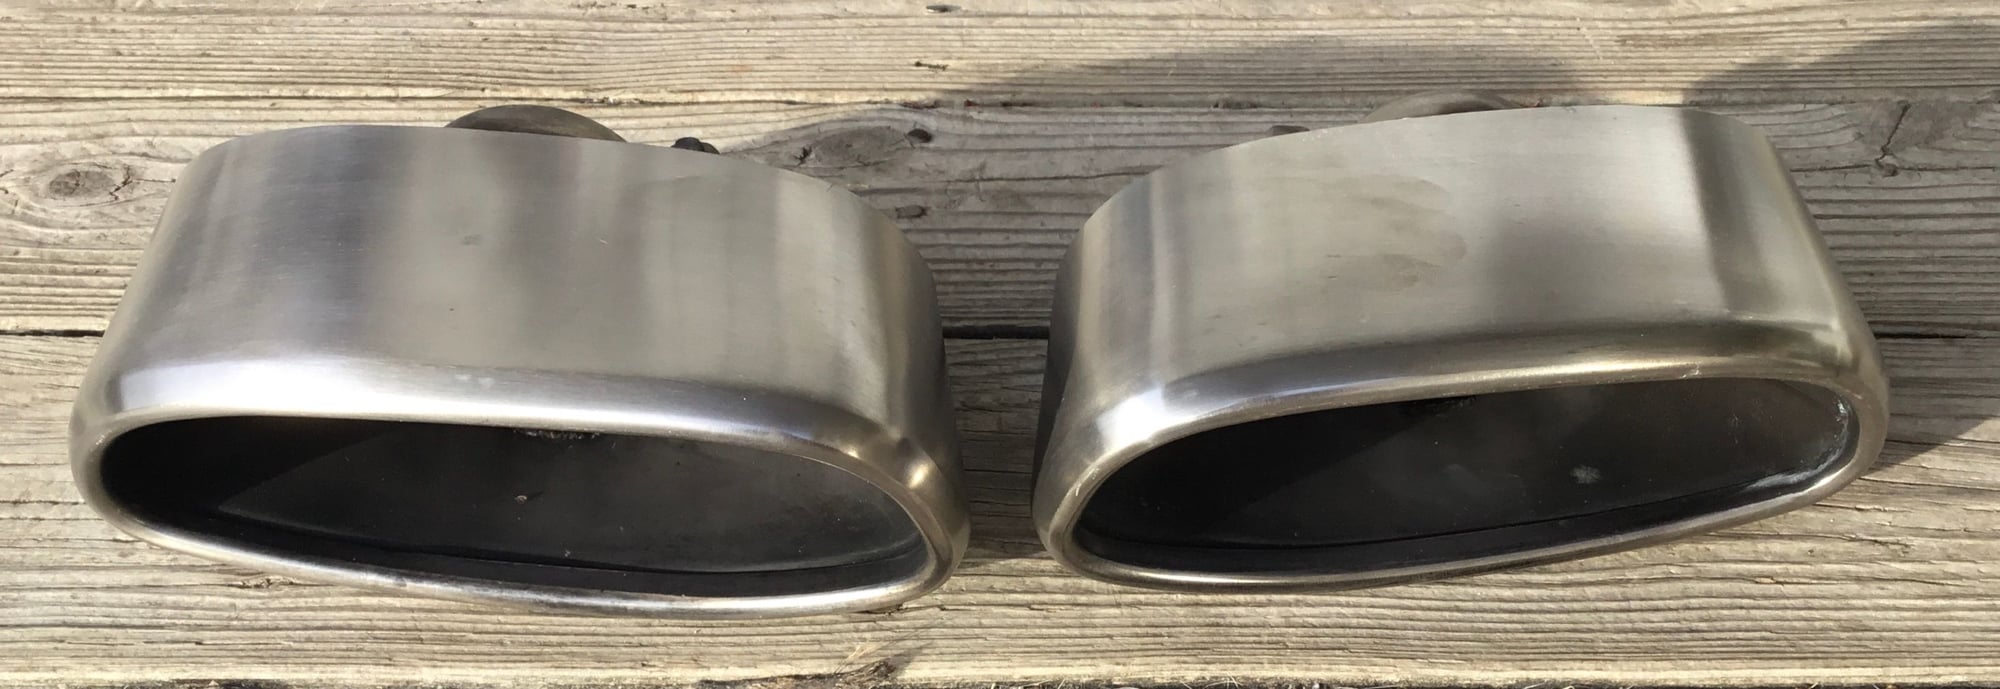 Engine - Exhaust - 991 SOUL AND STOCK EXHAUST TIPS , RENNLINE TOW HOOK - Used - Telford, PA 18969, United States